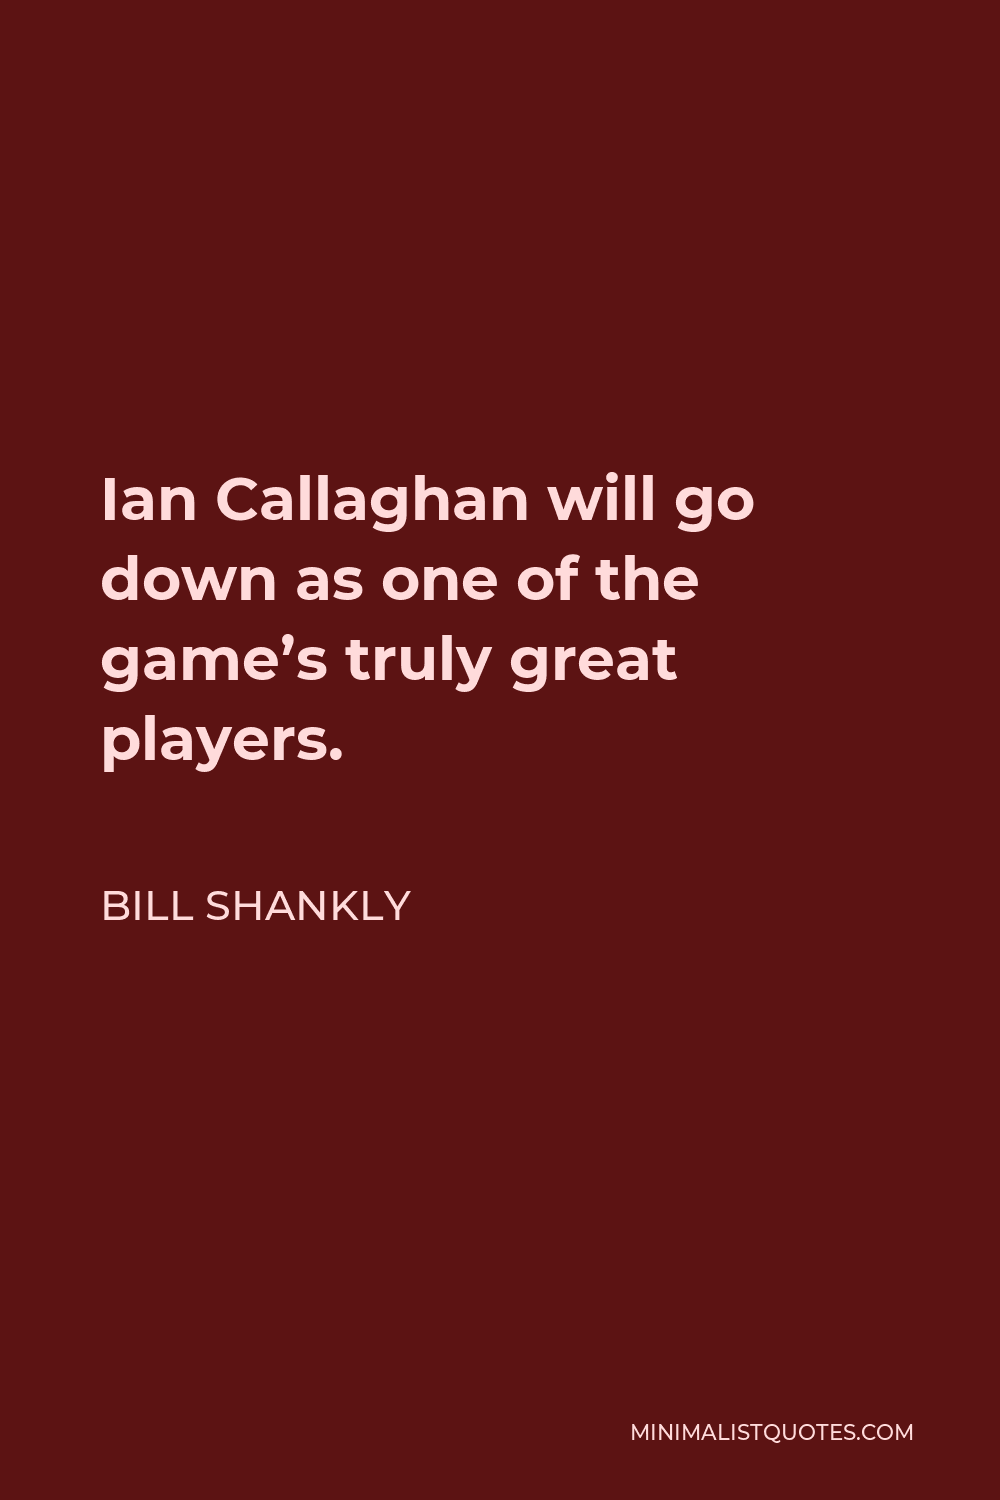 Bill Shankly Quote - Ian Callaghan will go down as one of the game’s truly great players.